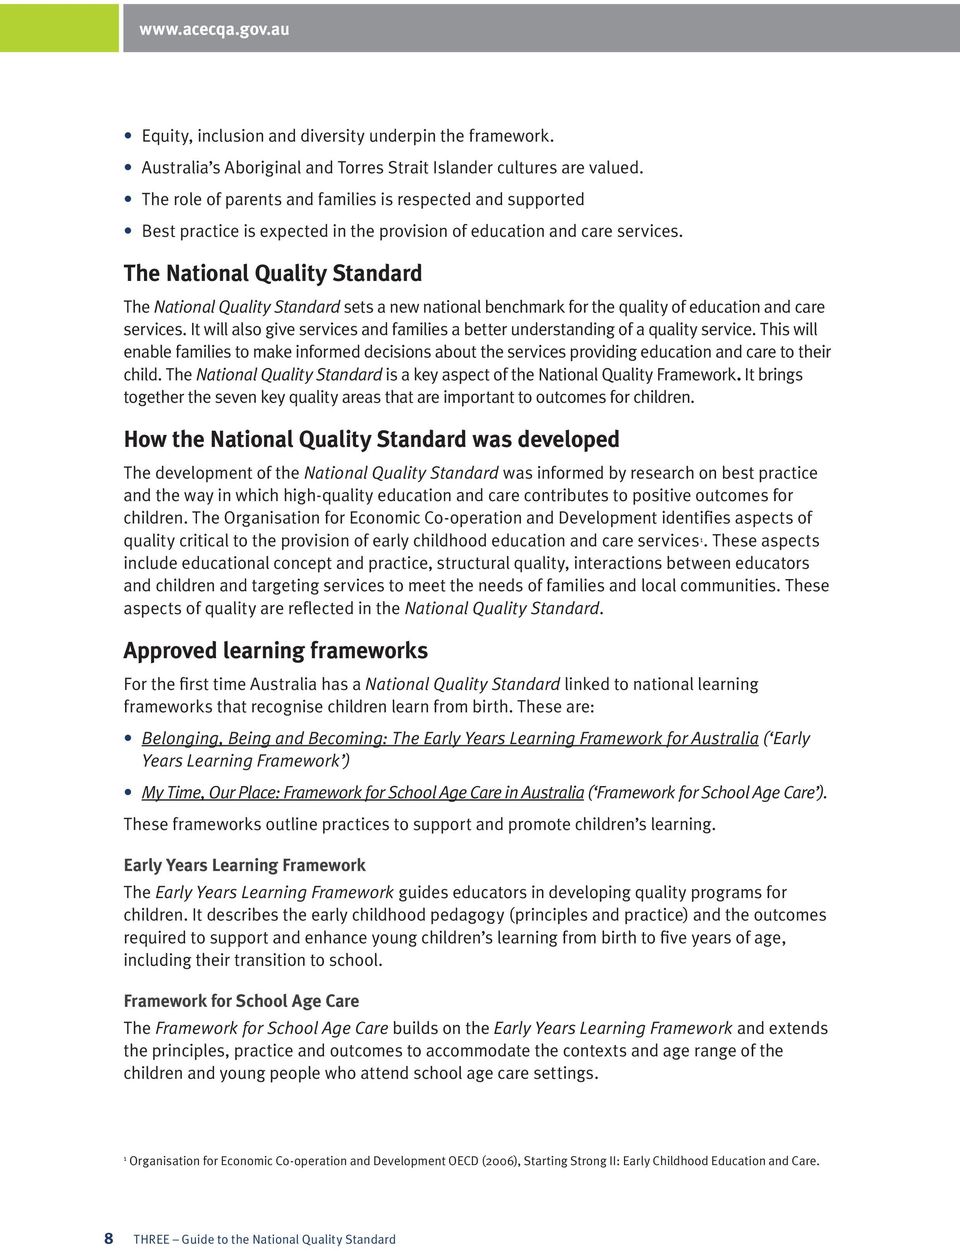 The National Quality Standard The National Quality Standard sets a new national benchmark for the quality of education and care services.